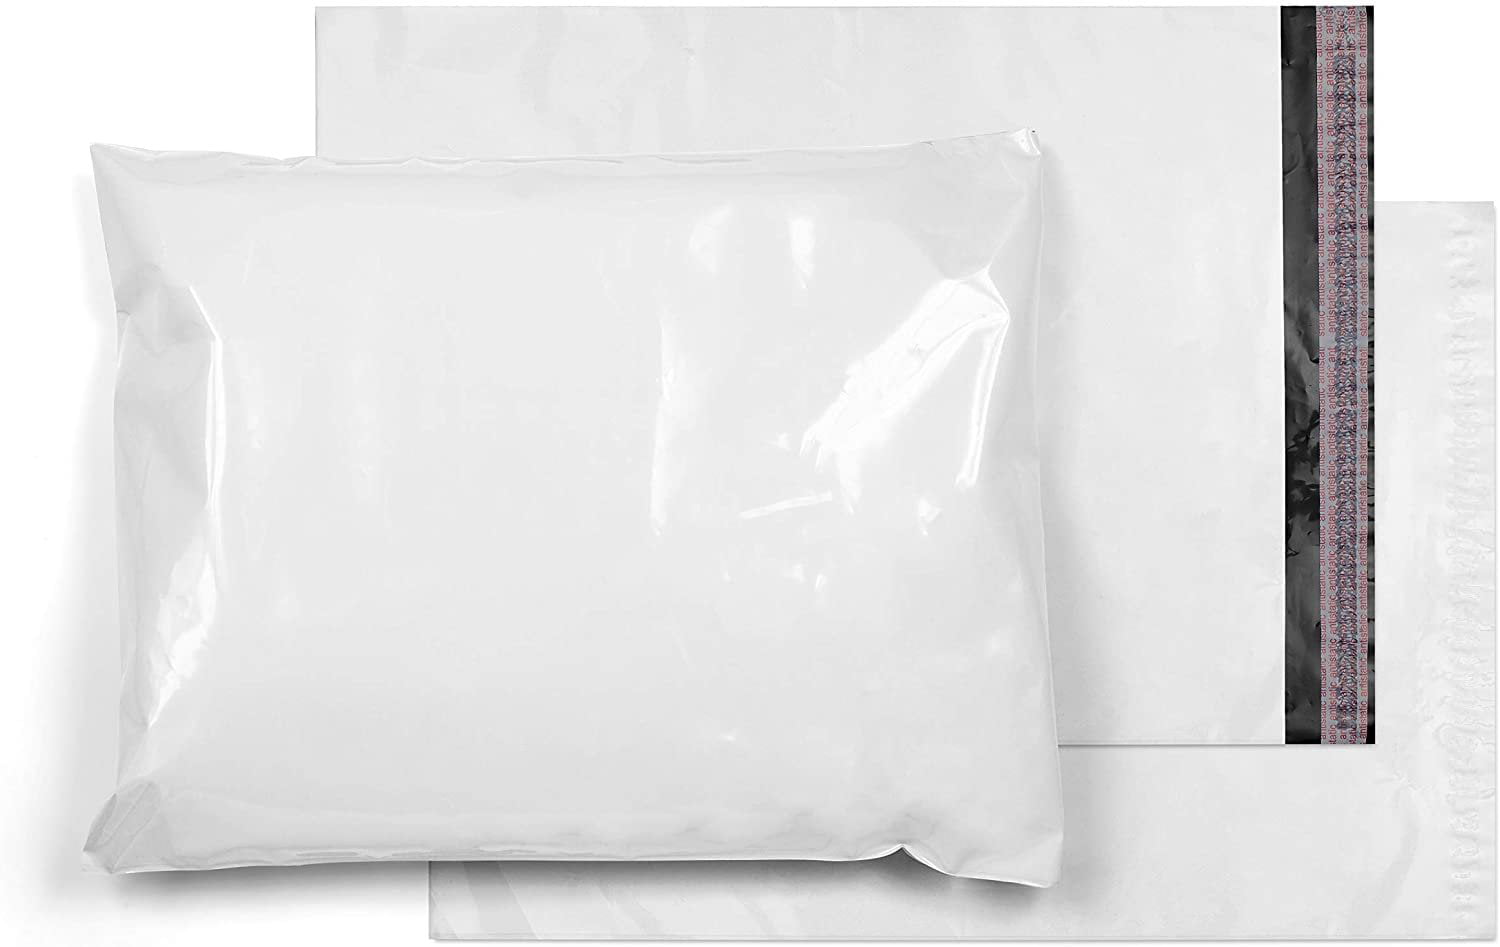 20-12x15.5 WHITE POLY MAILERS ENVELOPES BAGS 12 x 15.5-2.5MIL